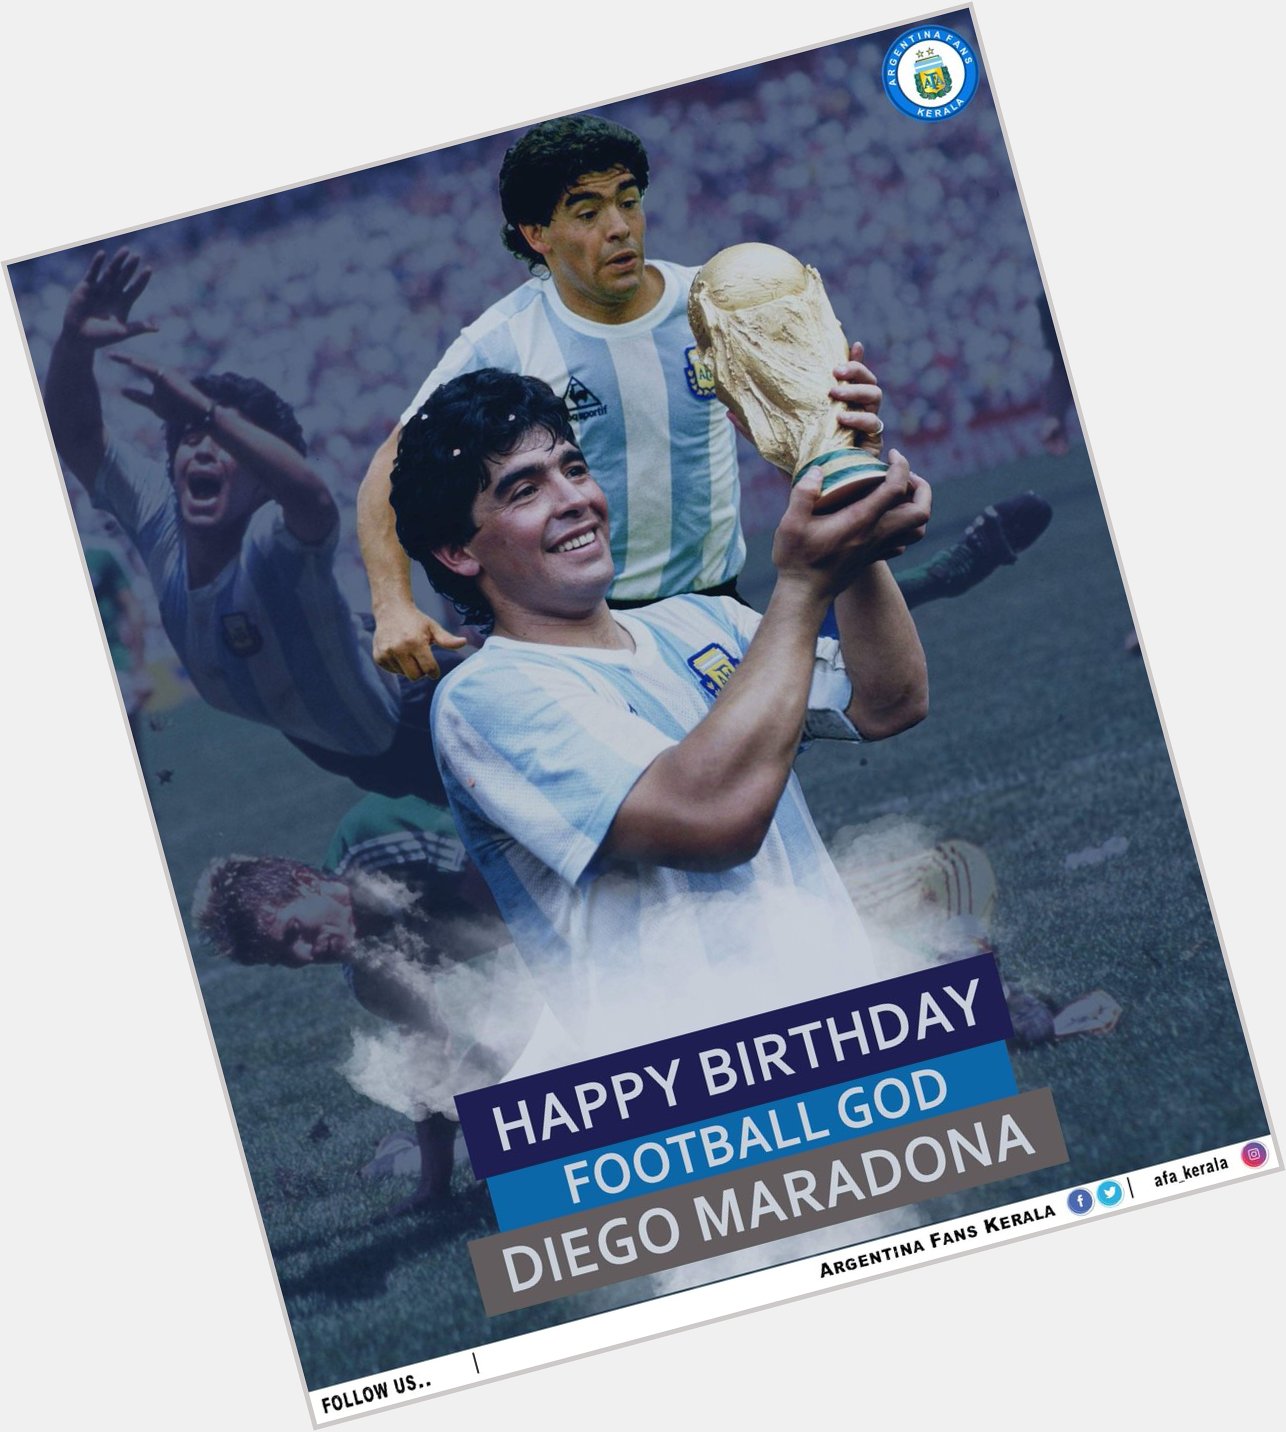 One of the greatest to ever grace the game   Diego Maradona is 58 today. Happy birthday!  